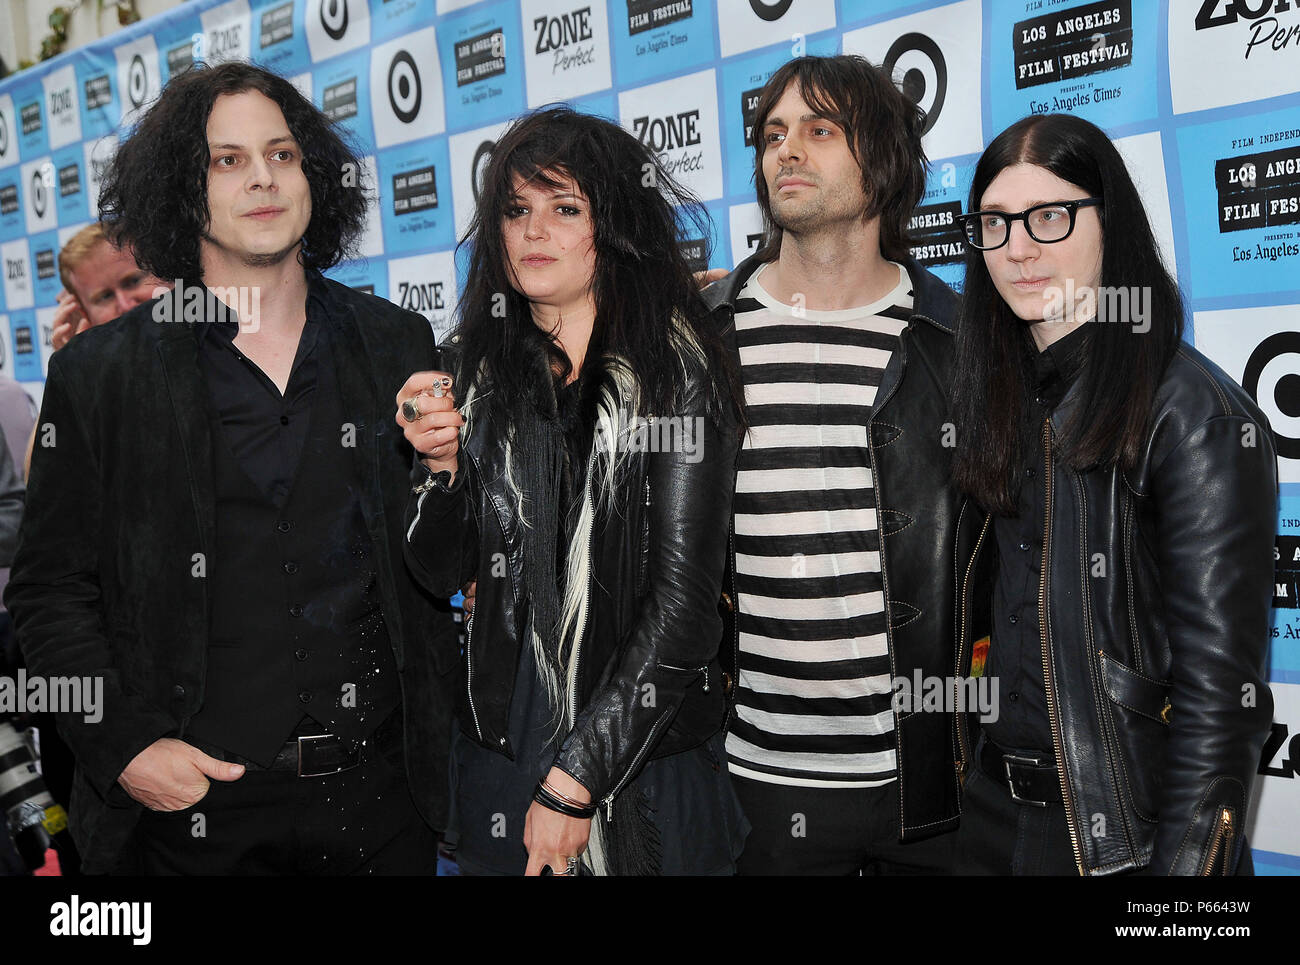 Jack White, Alison Mosshart ( of The Kills ), Dean Fertita ( of the Queens of Stone Age ), Jack lawrence ( of the Raconteurs )- It May Get loud Premiere at the LA Film Festival at the Man Festival Theatre In Los Angeles.          -            TheDeadWeather 22.jpgTheDeadWeather 22  Event in Hollywood Life - California, Red Carpet Event, USA, Film Industry, Celebrities, Photography, Bestof, Arts Culture and Entertainment, Topix Celebrities fashion, Best of, Hollywood Life, Event in Hollywood Life - California, Red Carpet and backstage, ,Arts Culture and Entertainment, Photography,    inquiry ts Stock Photo